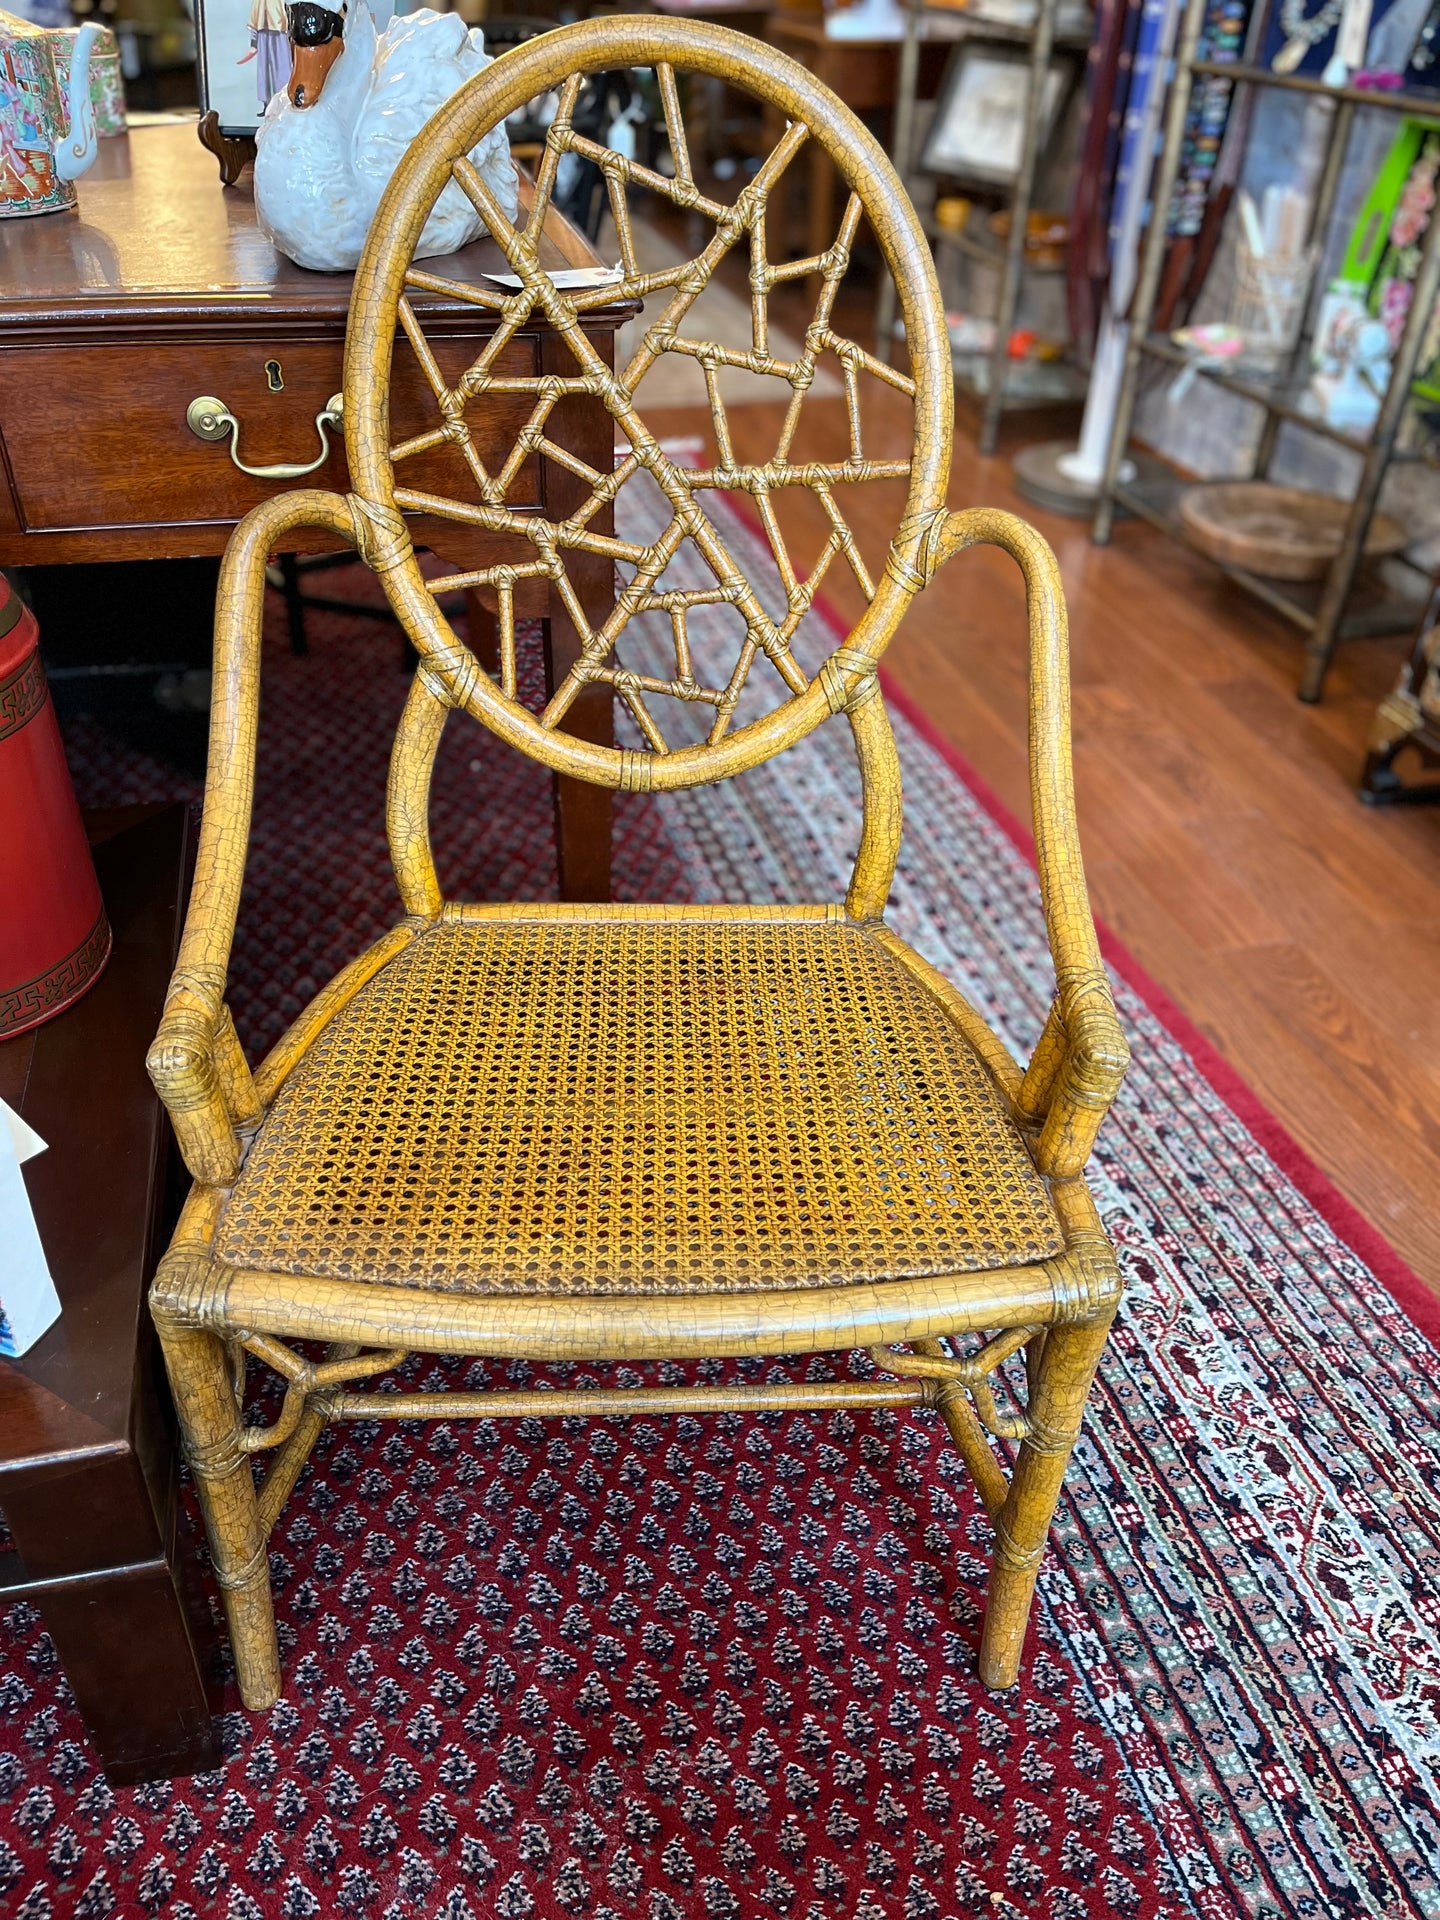 Pair of McGuire Bamboo Chairs